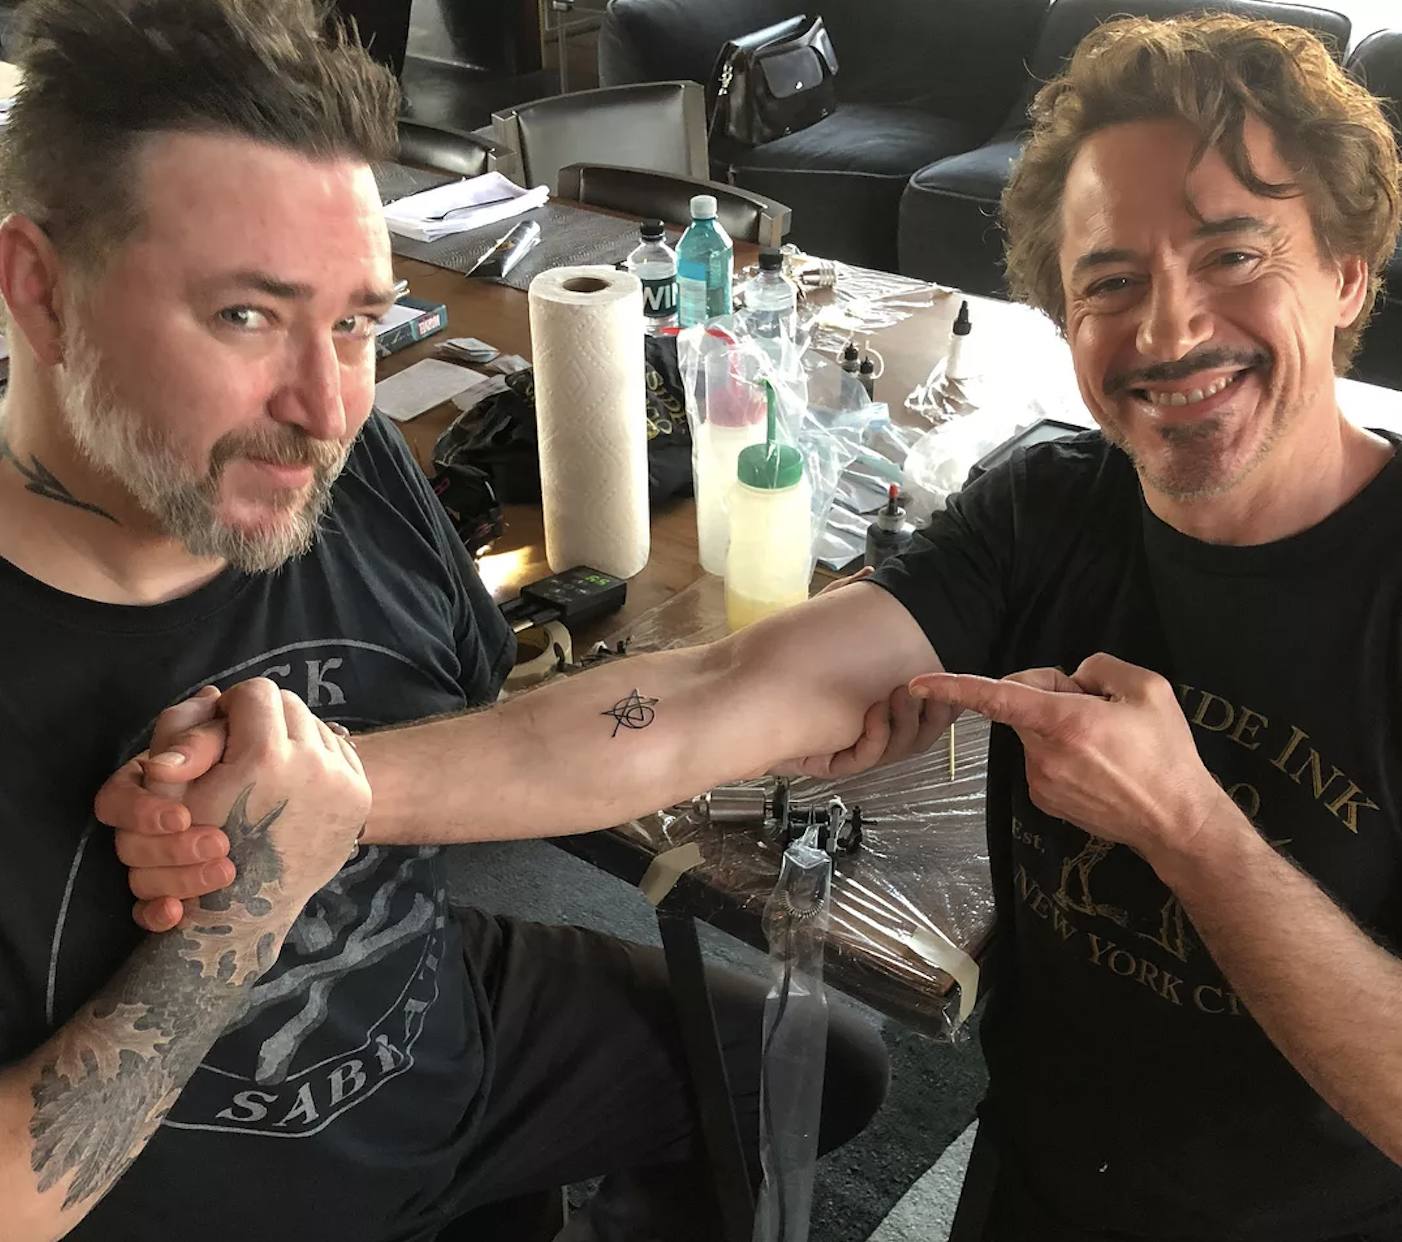 The Terminator FANS  Robert Patrick is ripped but it is for a secret role  not Terminator according to Robert but it is great to see Robert getting  in shape Terminator RobertPatrick 